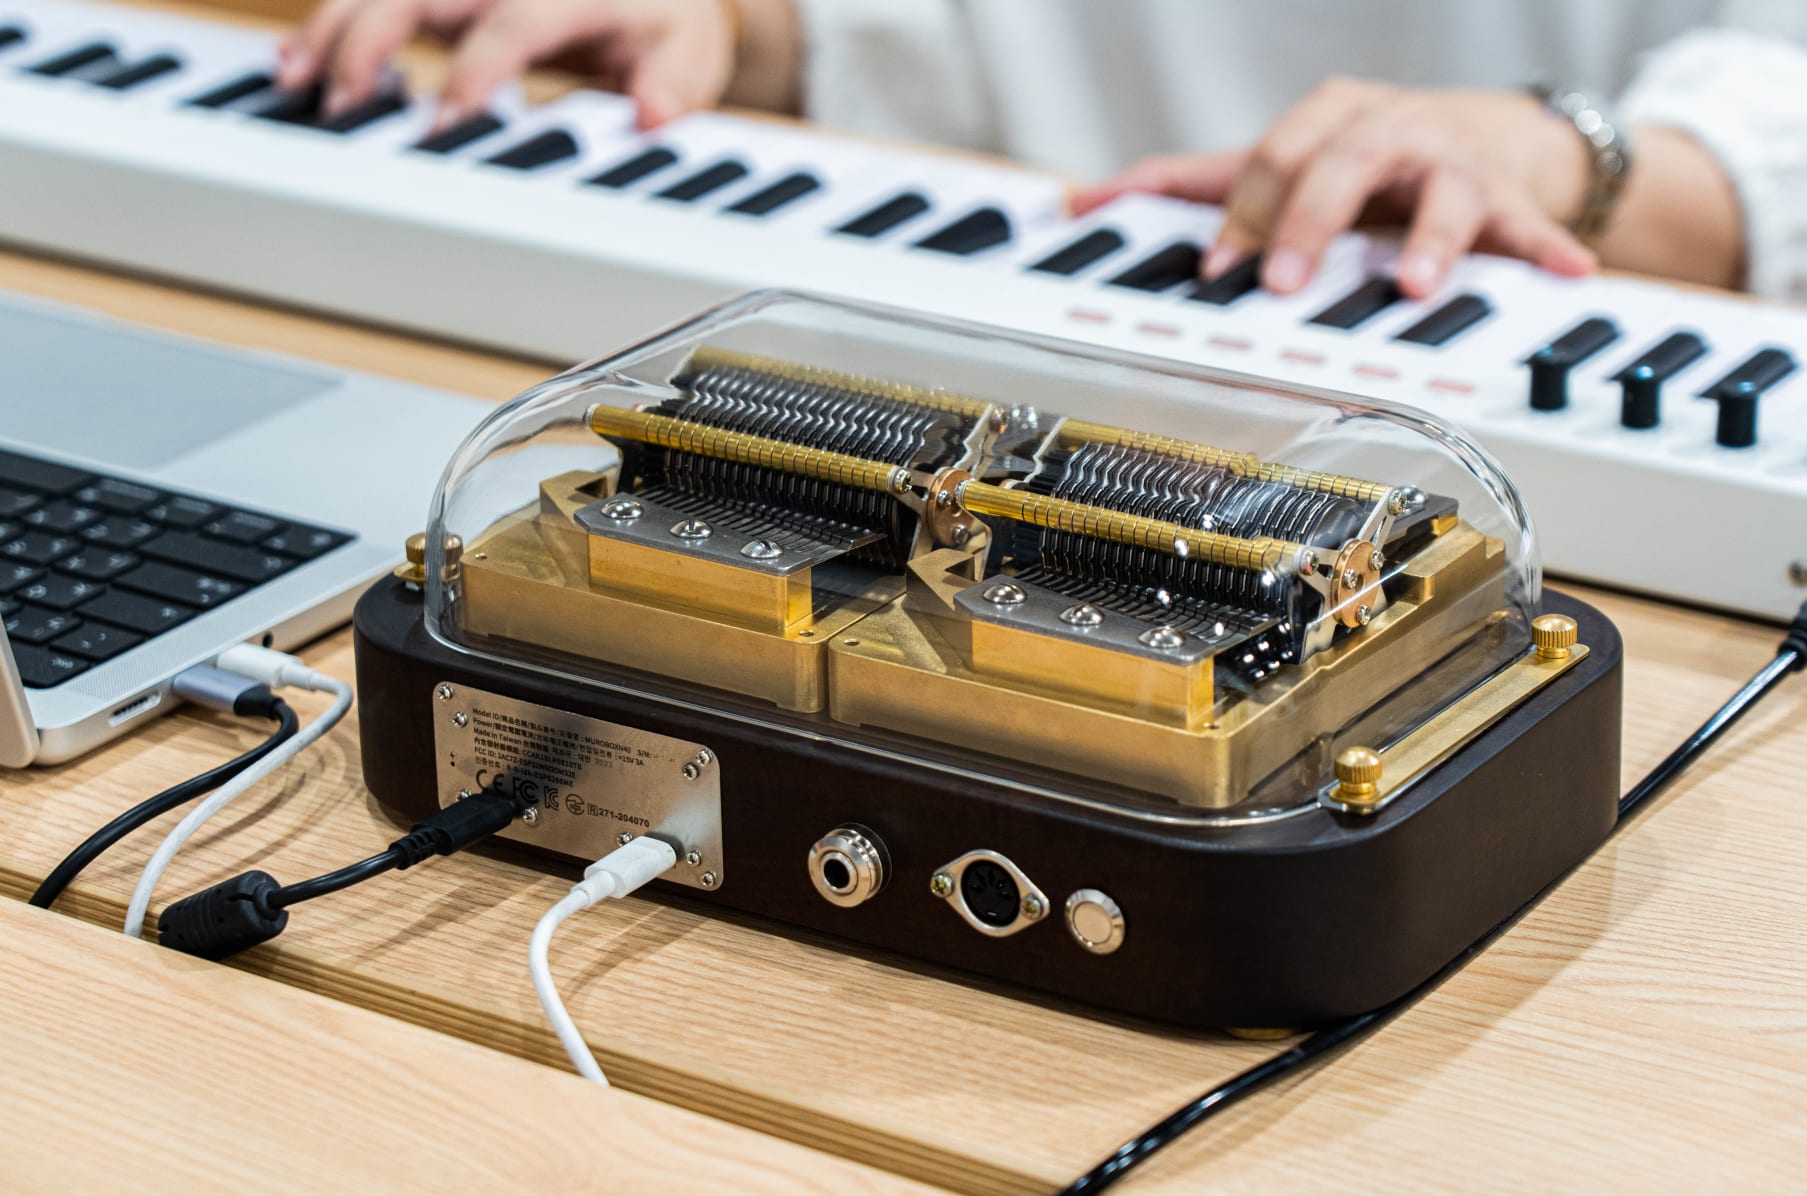 Explore More Programmable Music Box Engineering